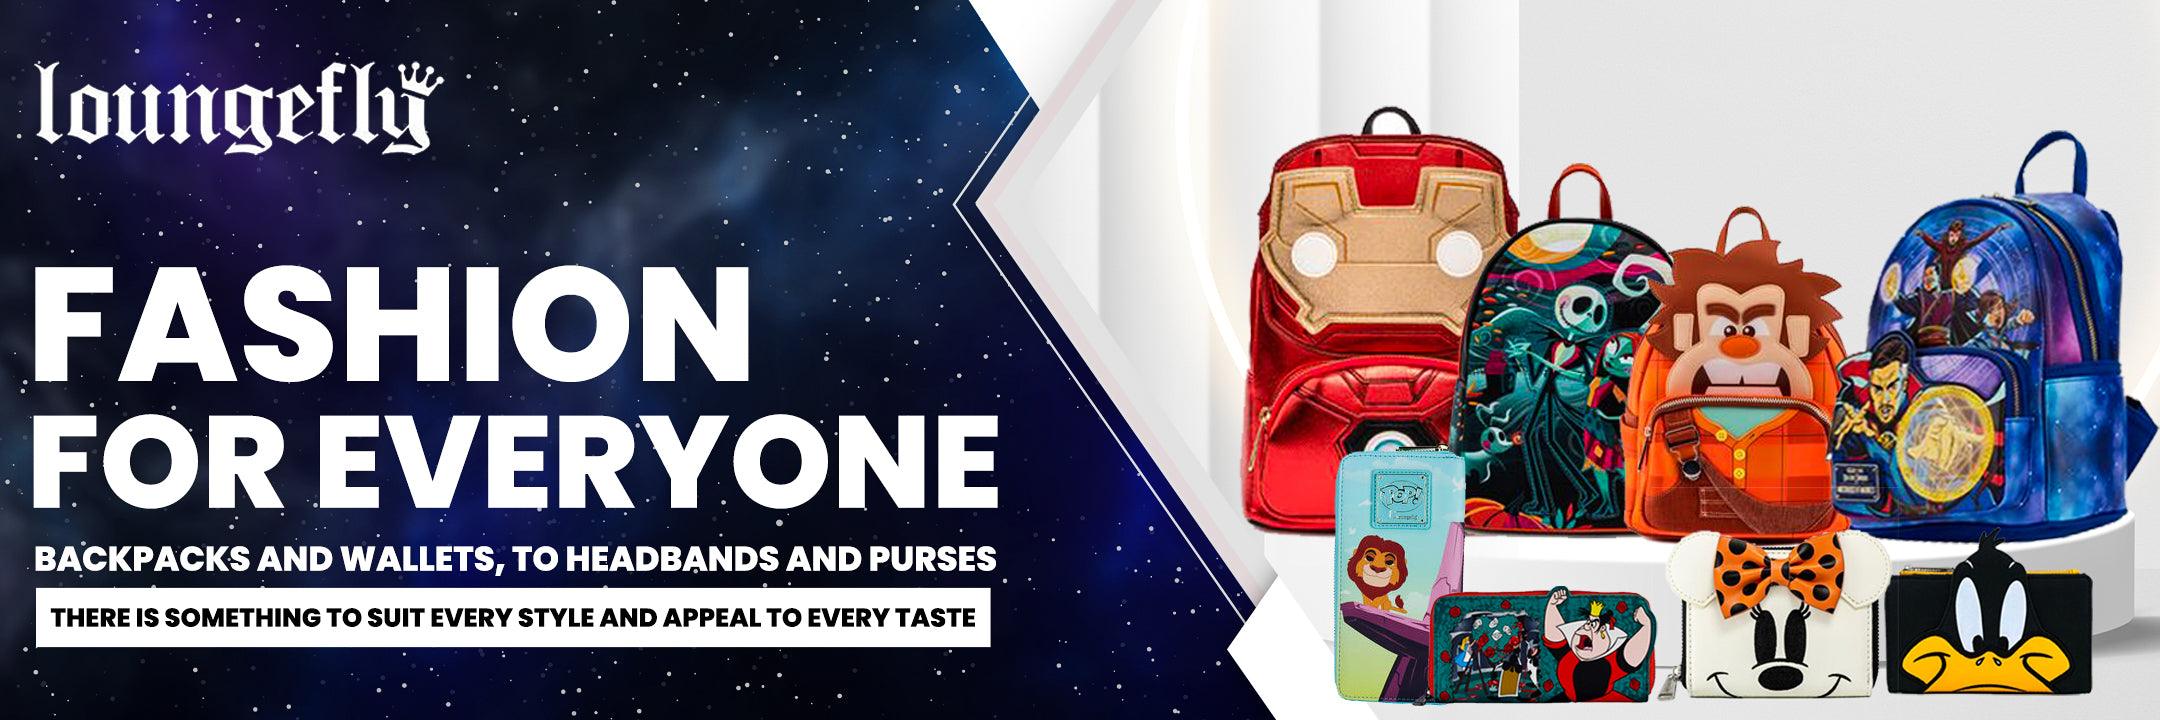 Loungefly_Collections_Backpacks_bags_and_wallets - Ginga Toys